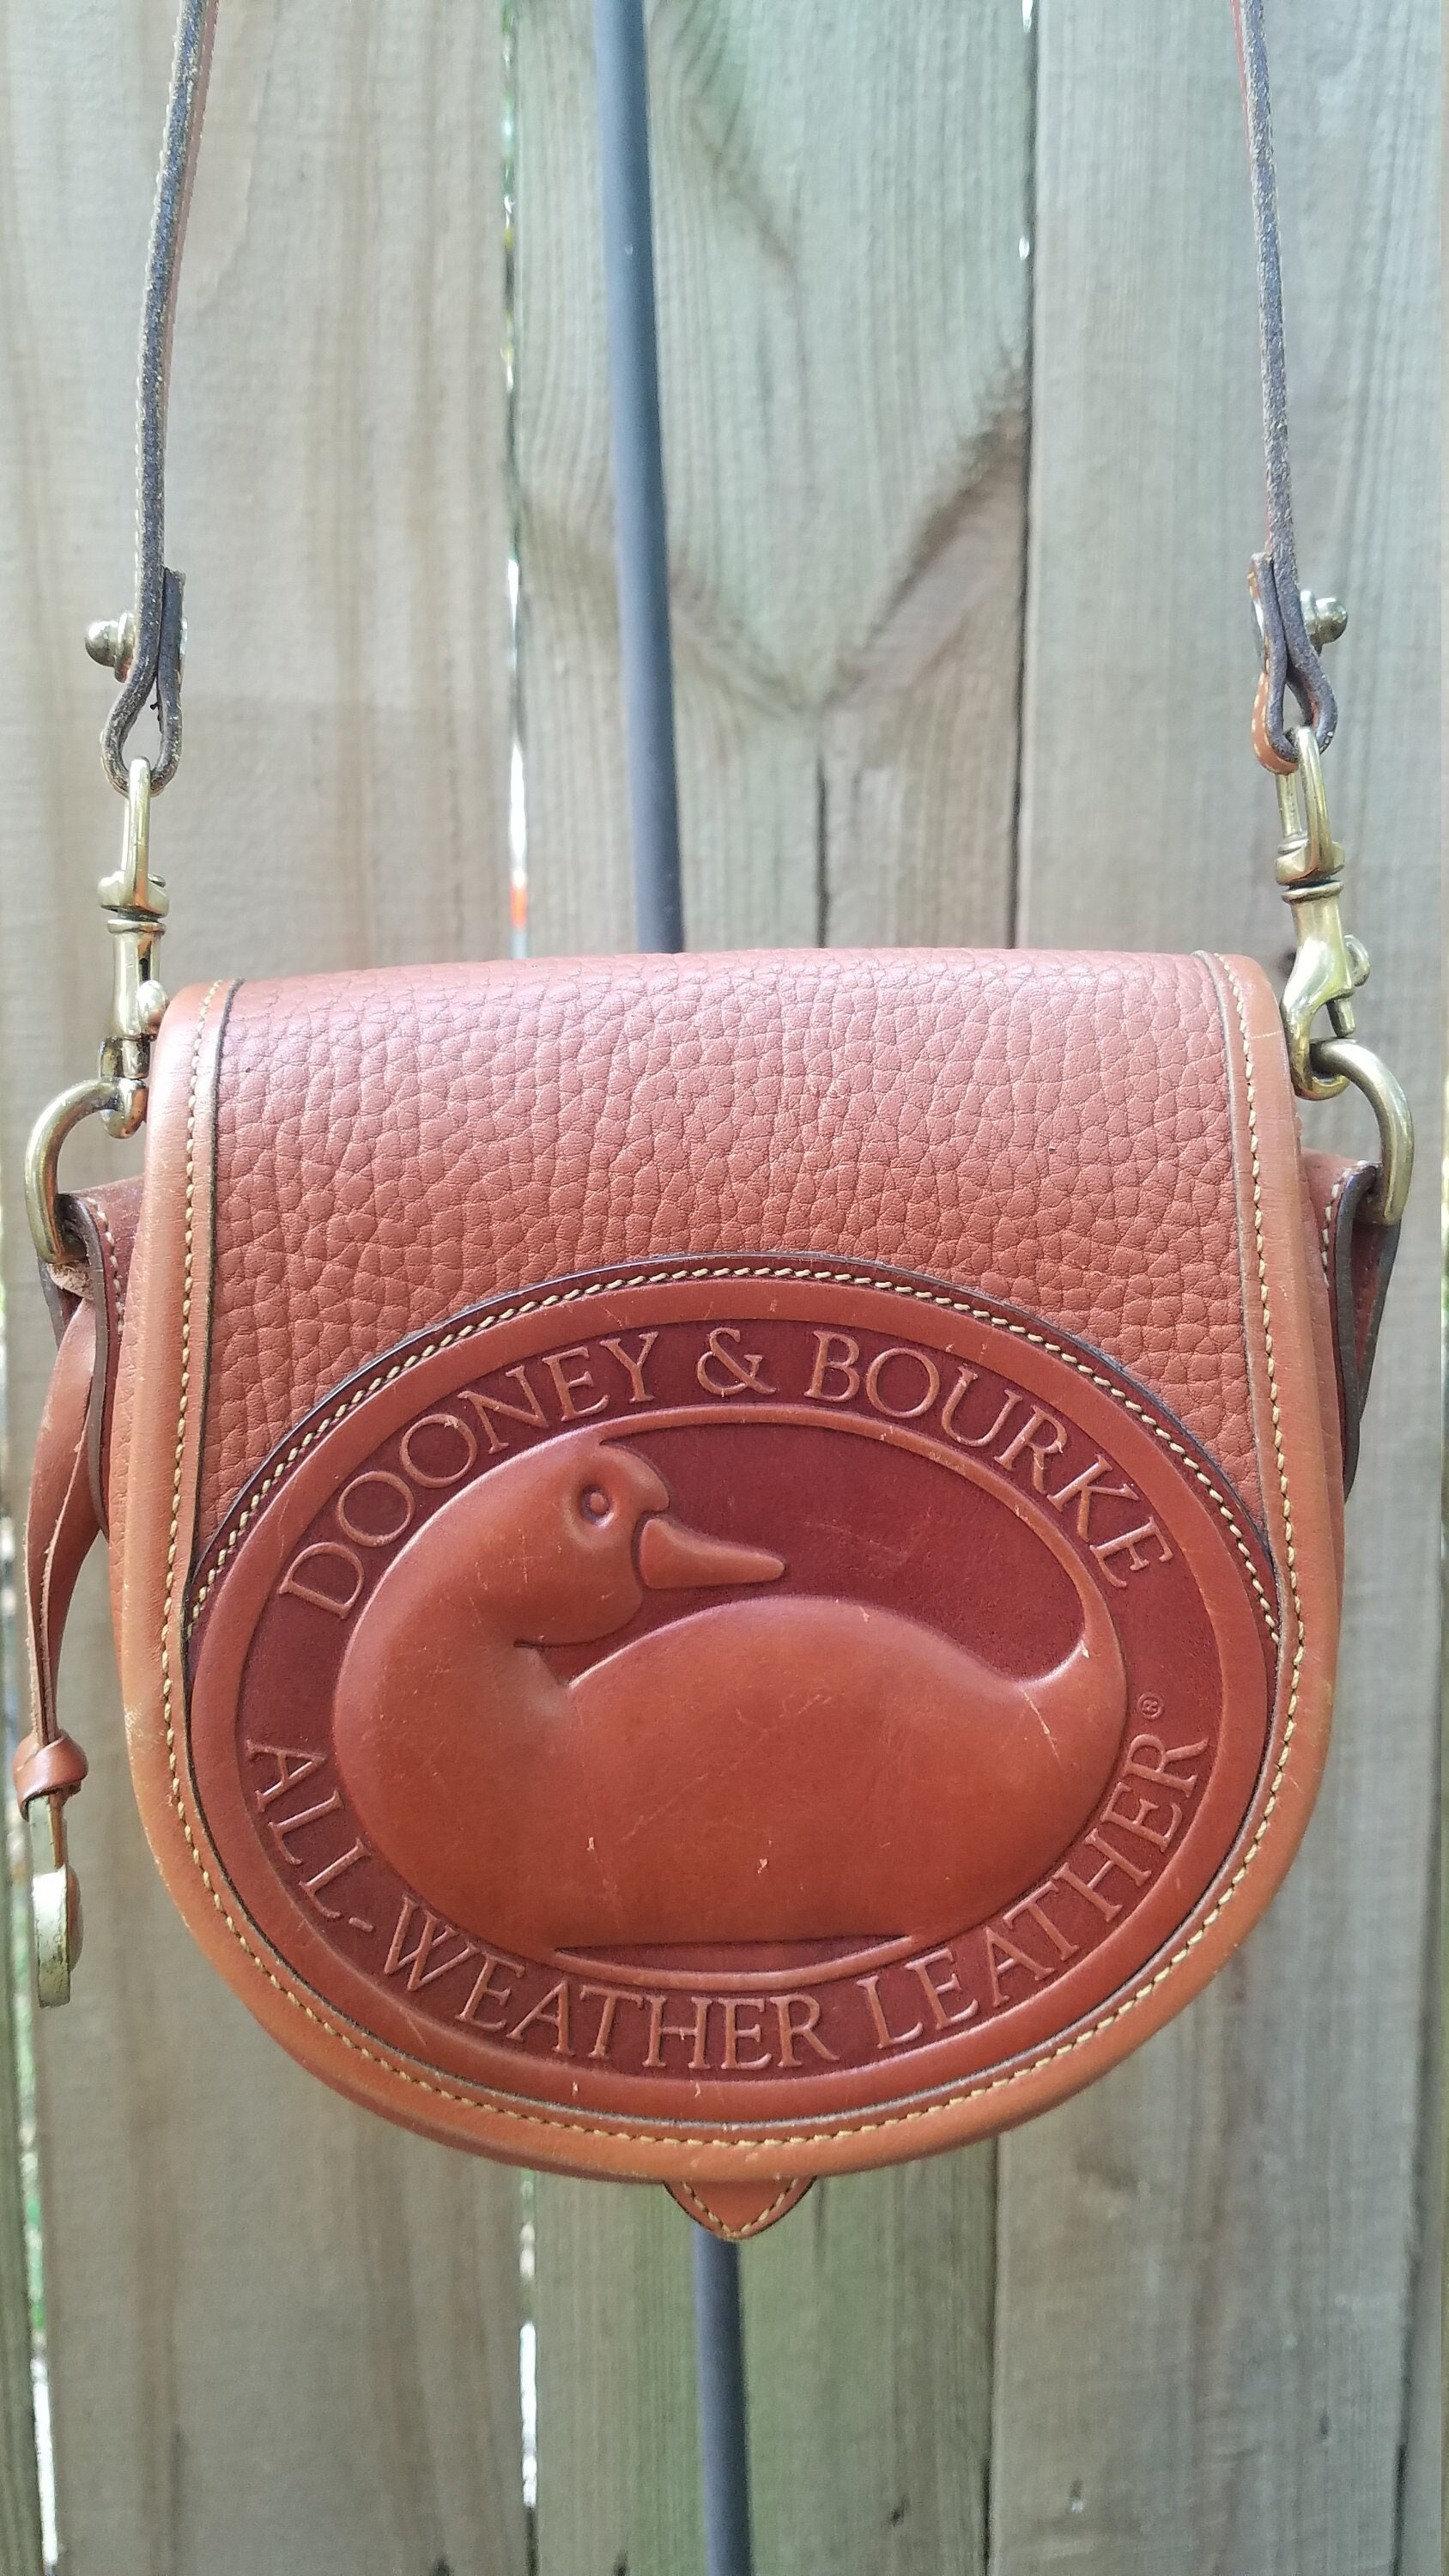 Vintage Dooney and Bourke All-Weather Leather Mini Saddle Bag with Belt Loop